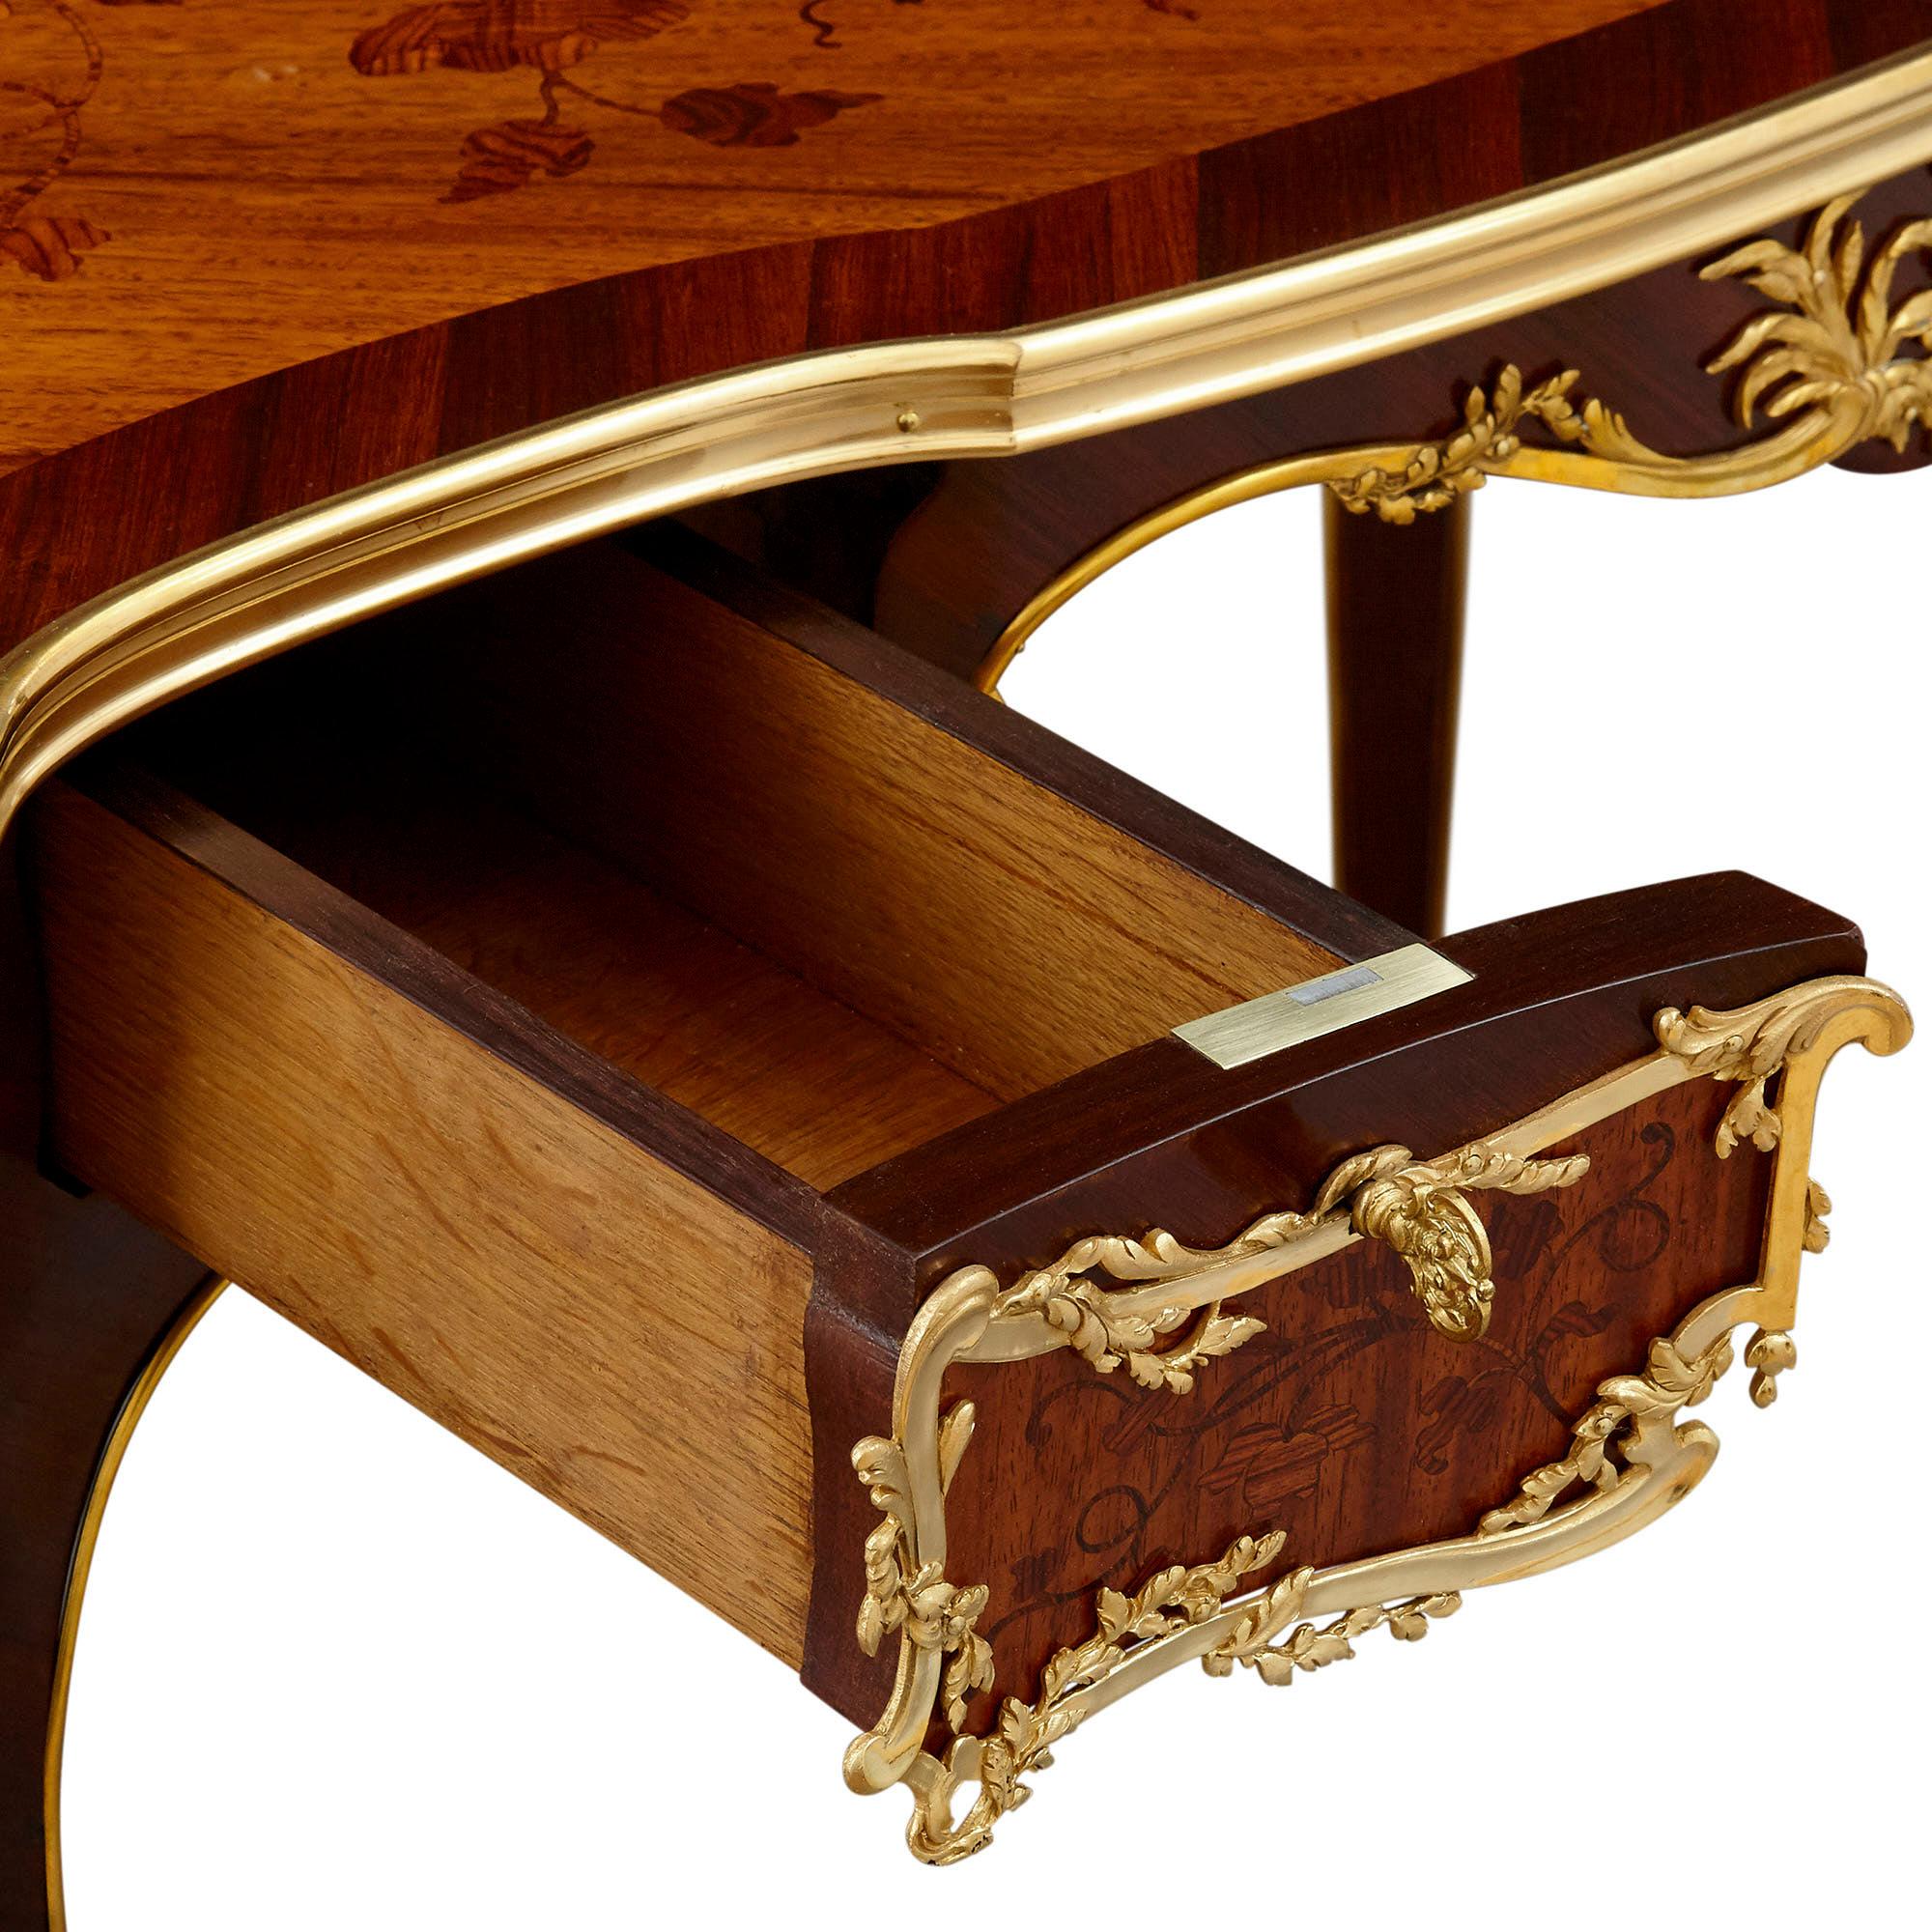 19th Century Louis XV Style Gilt Bronze and Marquetry Desk Attributed to Zwiener For Sale